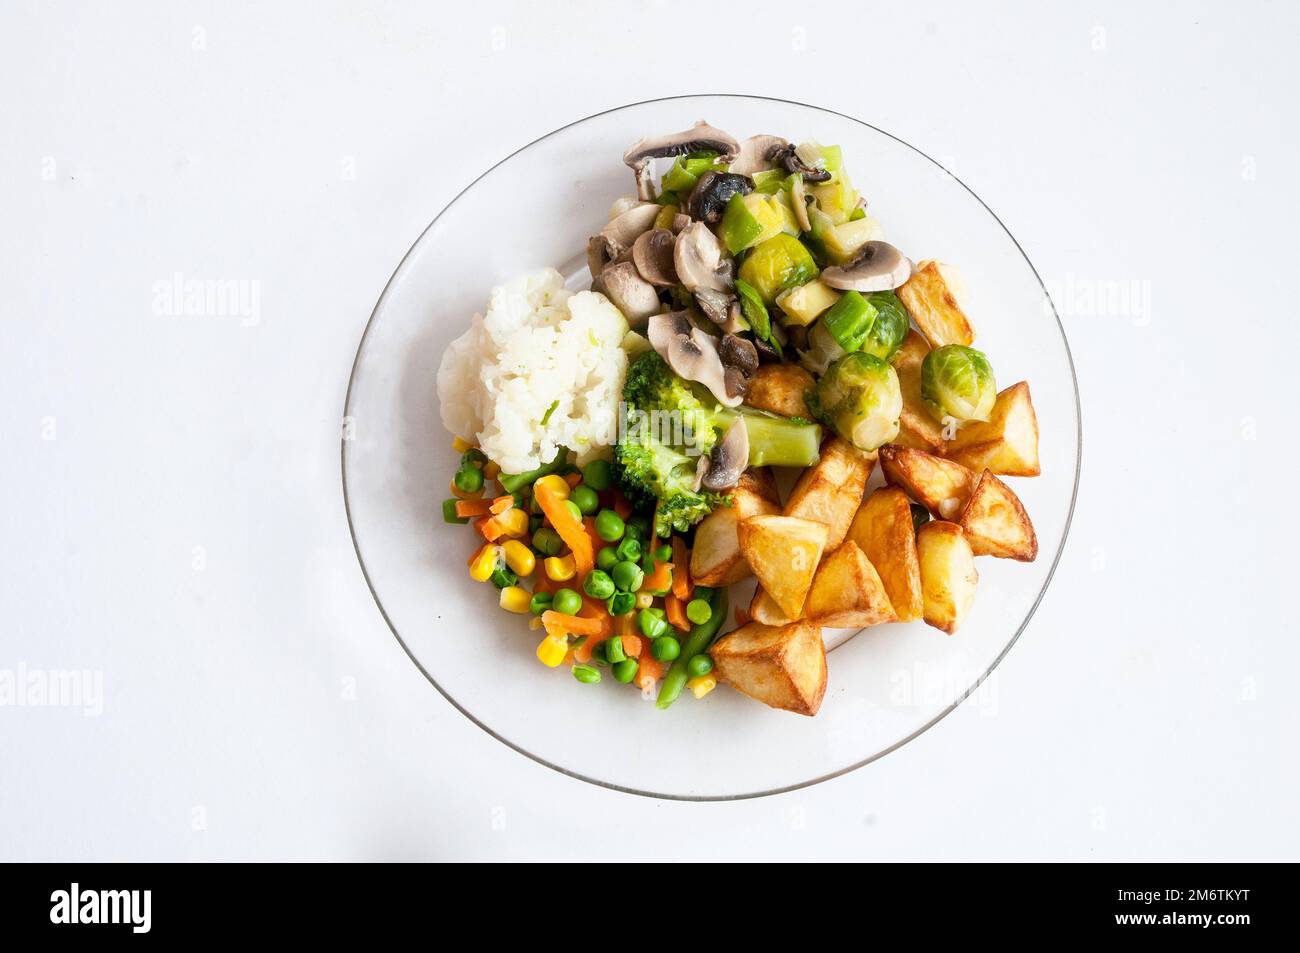 Cooked meal on a glass dinner plate a meat free vegetable meal of Cauliflower Brussel Sprouts Broccoli Mushrooms Mixed Vegetables and Roast Potatoes Stock Photo